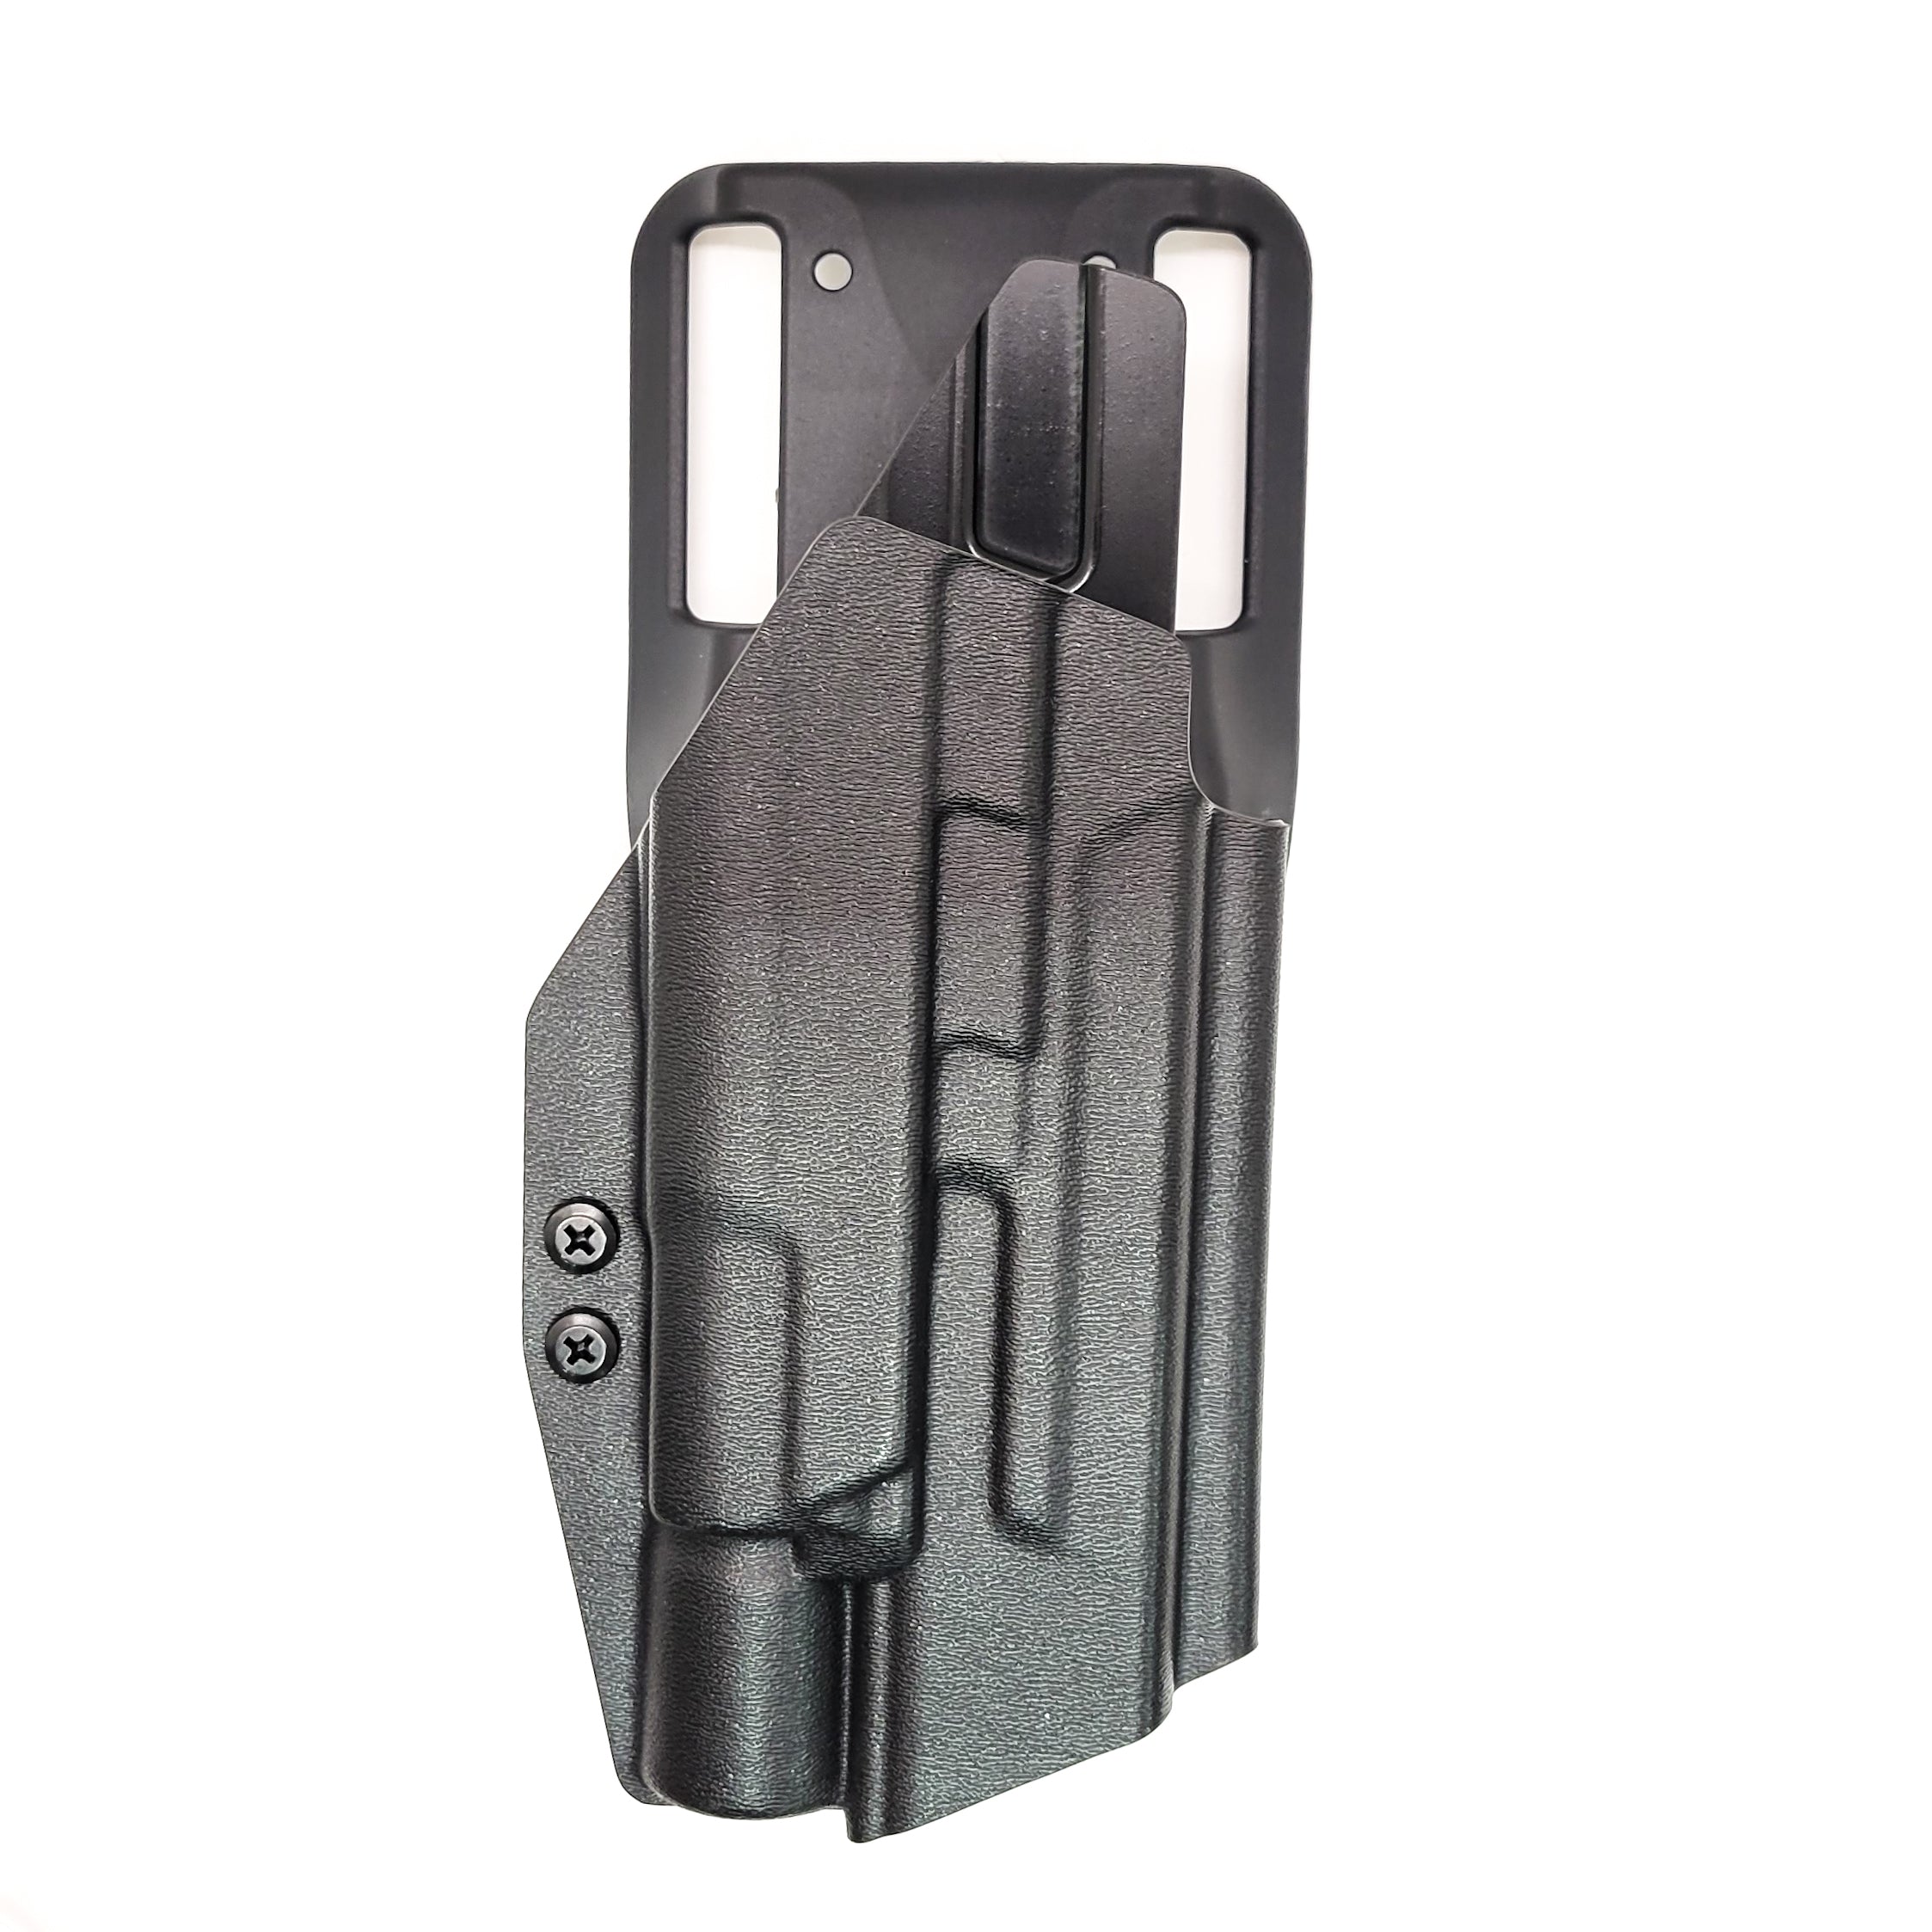 For the best Outside Waistband Duty & Competition OWB Kydex Holster designed to fit the Smith & Wesson M&P 10MM M2.0 4" or 4.6" pistol with thumb safety and Surefire X300U-A, X300U-B, X300T-A or X300T-B, shop four brothers holsters.  Full sweat guard, adjustable retention, profiled for a red dot sight. Made in the USA.